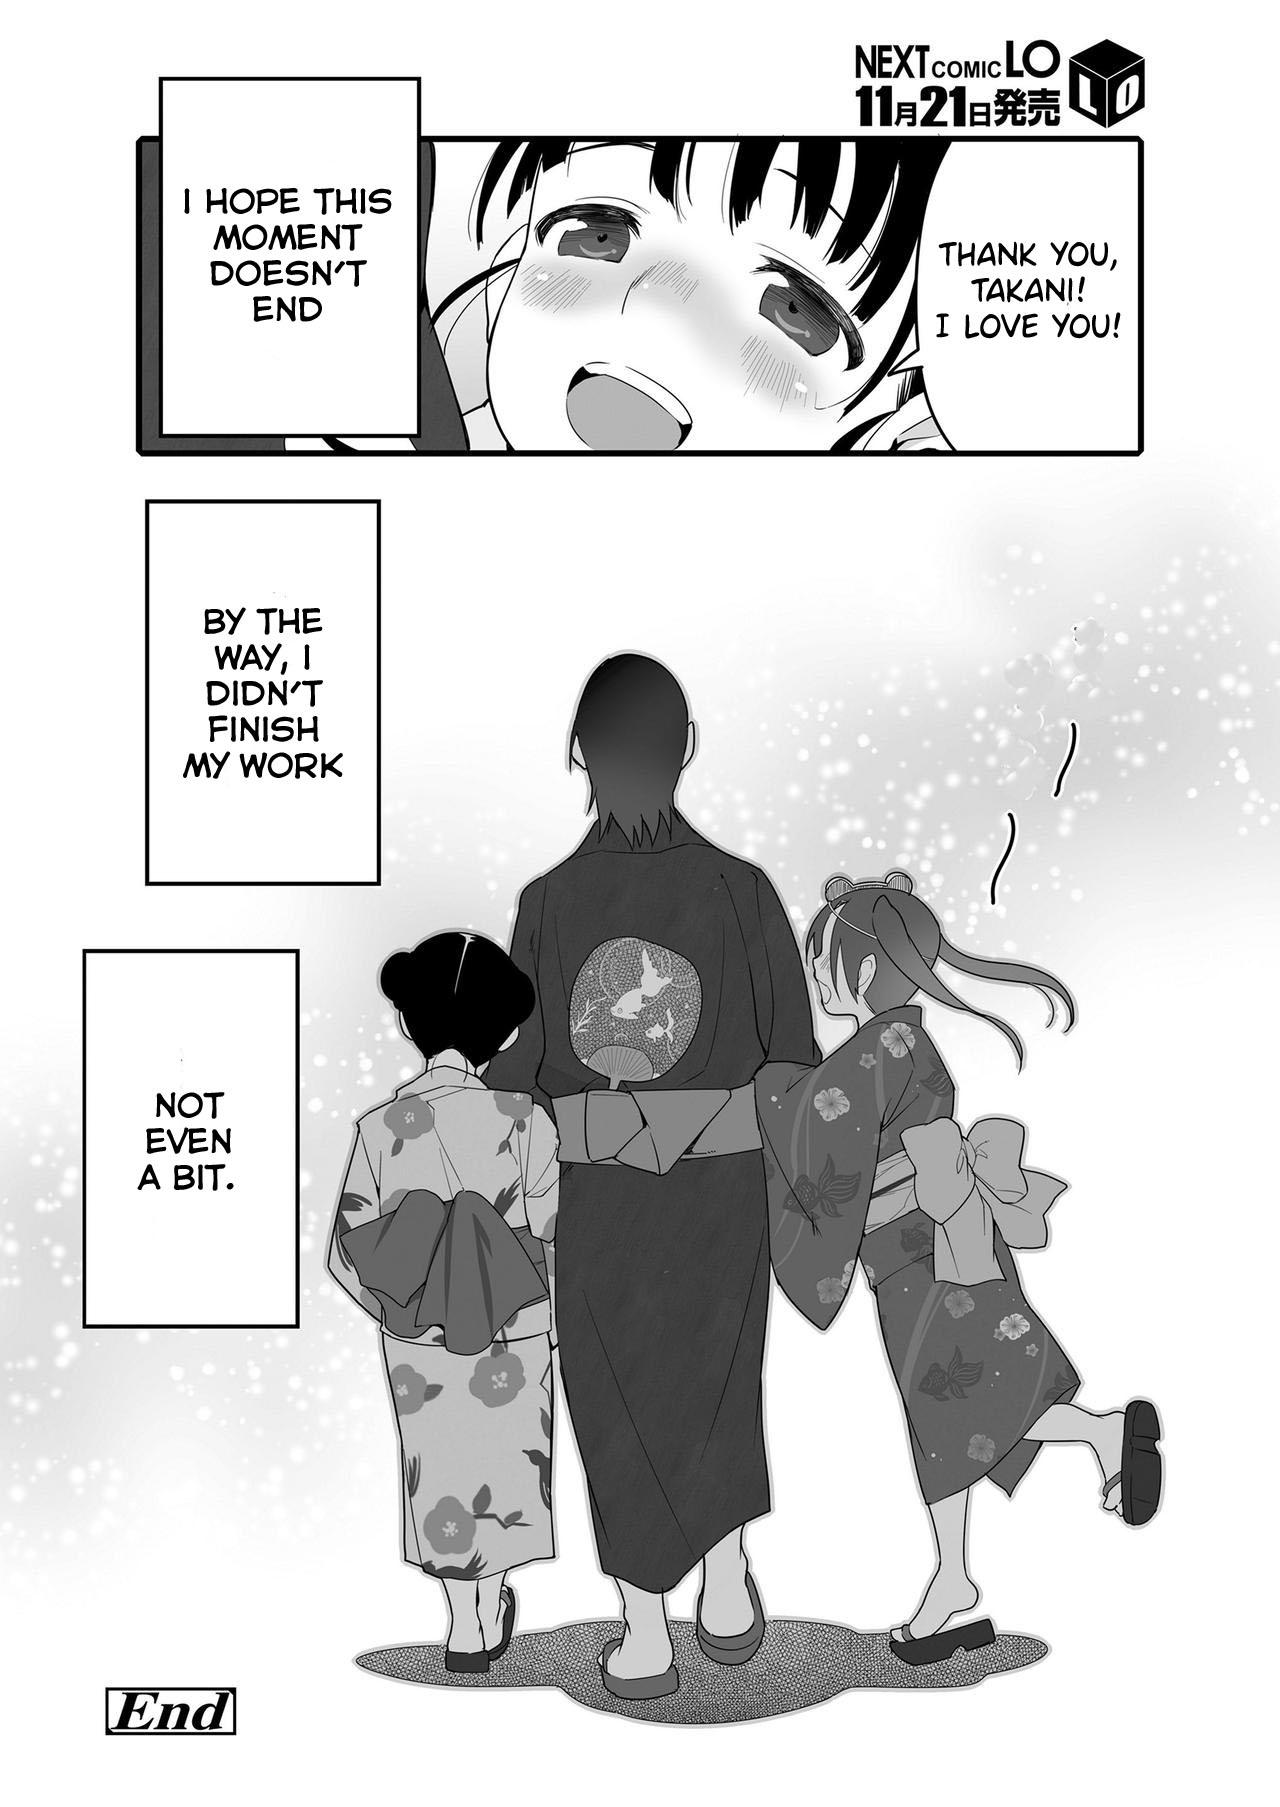 Ass Sex Uchiage Hanabi, Ane to Miruka? Imouto to Miruka? | Fireworks, Should we see it with the elder sister or the younger sister? Amador - Page 24